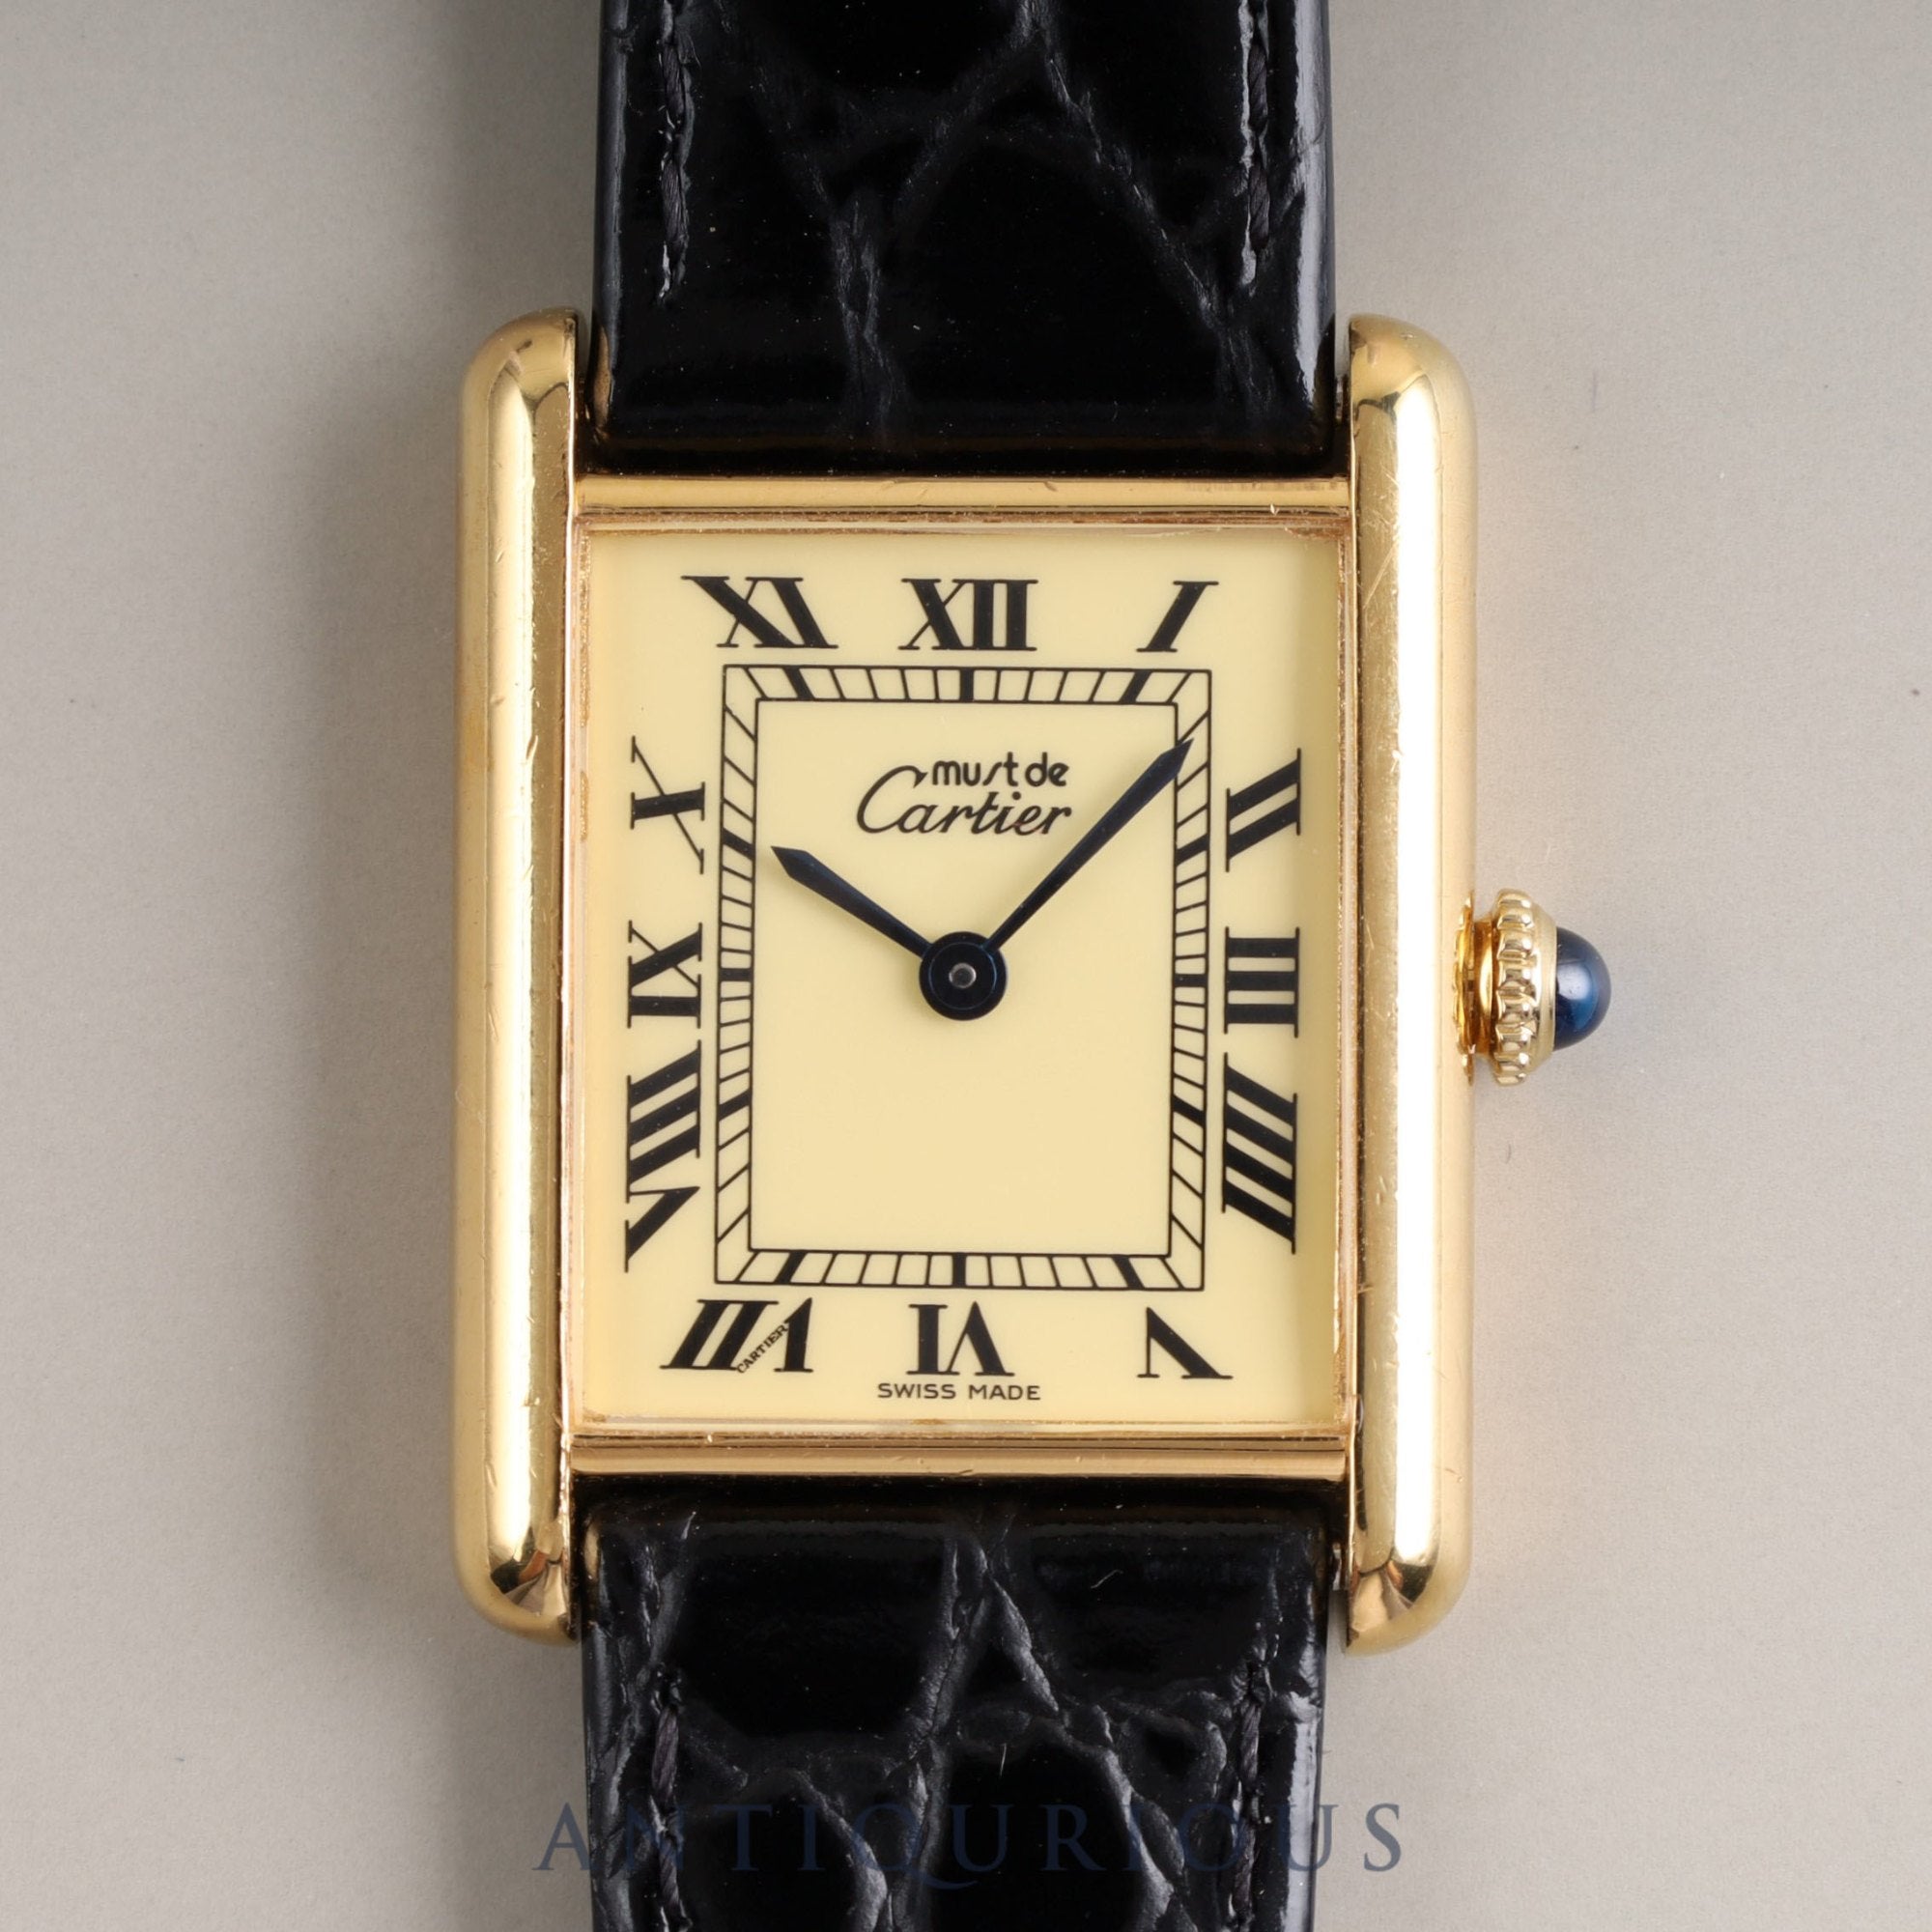 CARTIER Must Tank LM Manual winding 925 Leather Genuine buckle (GP) Ivory Roman dial Cartier boutique complete service